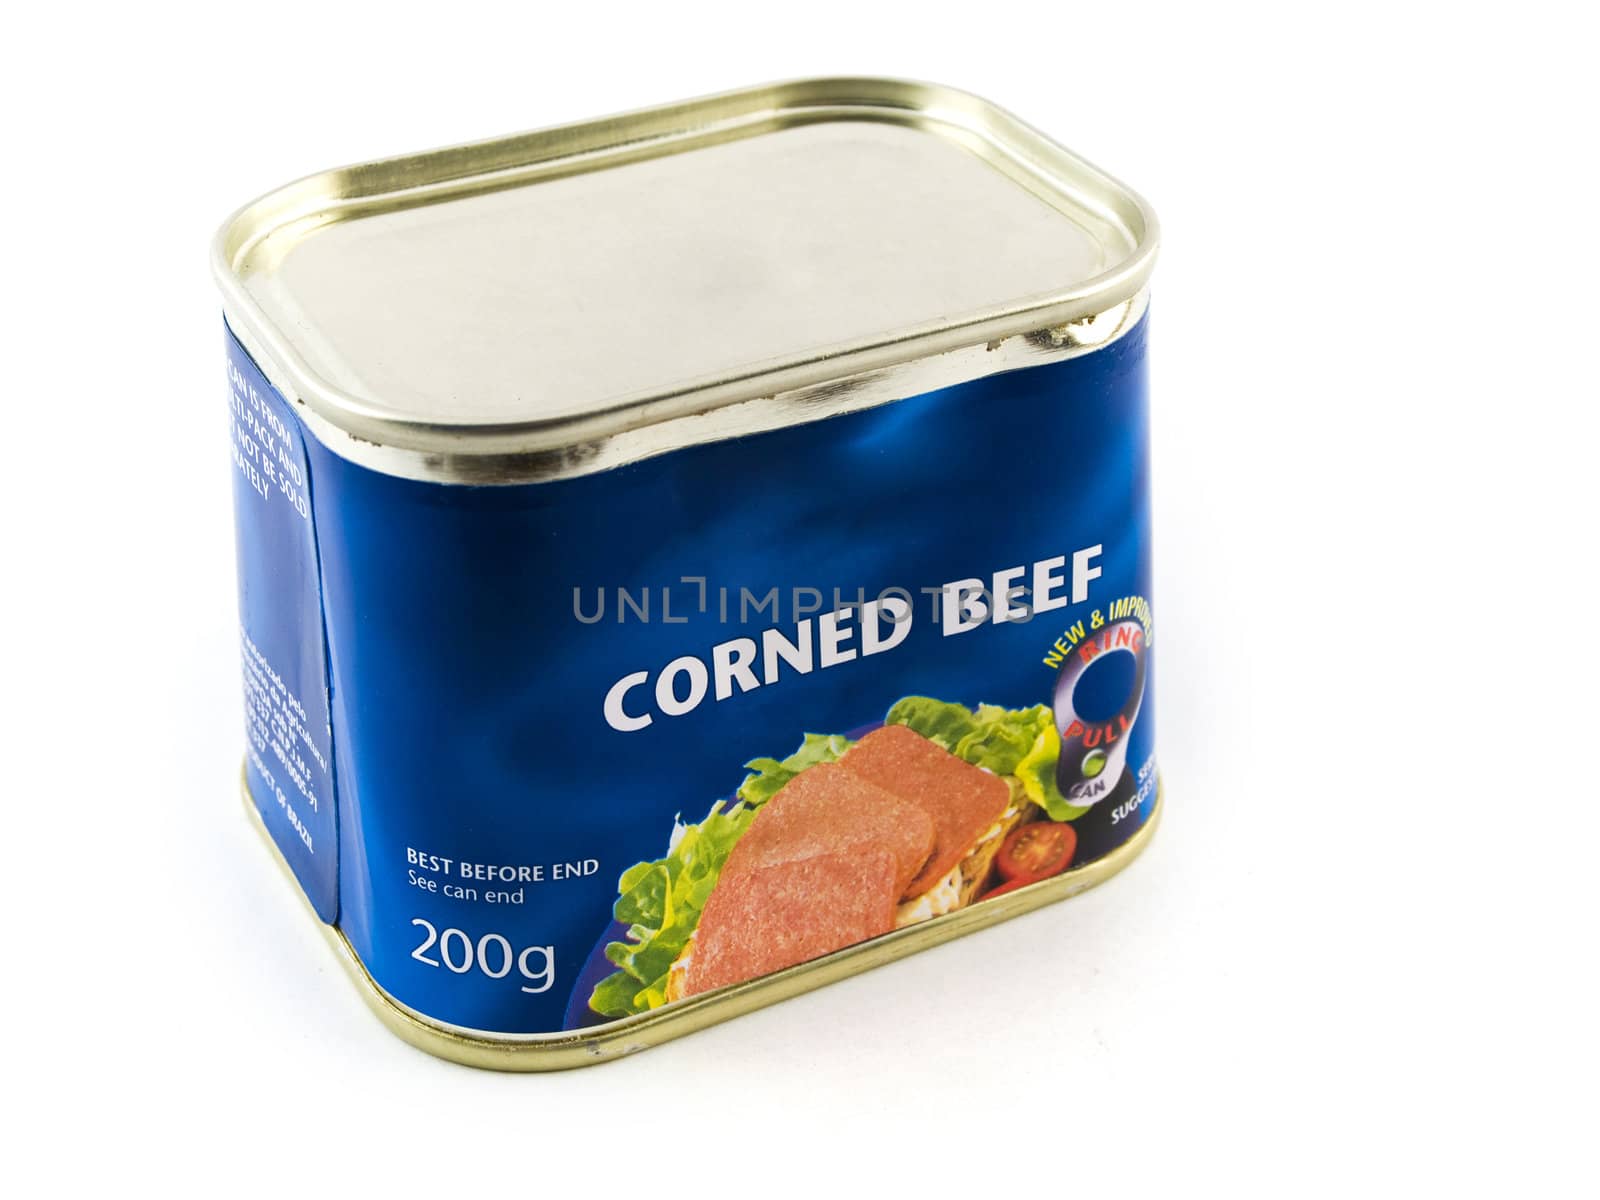 Corned Beef Tin Can on White Background by bobbigmac